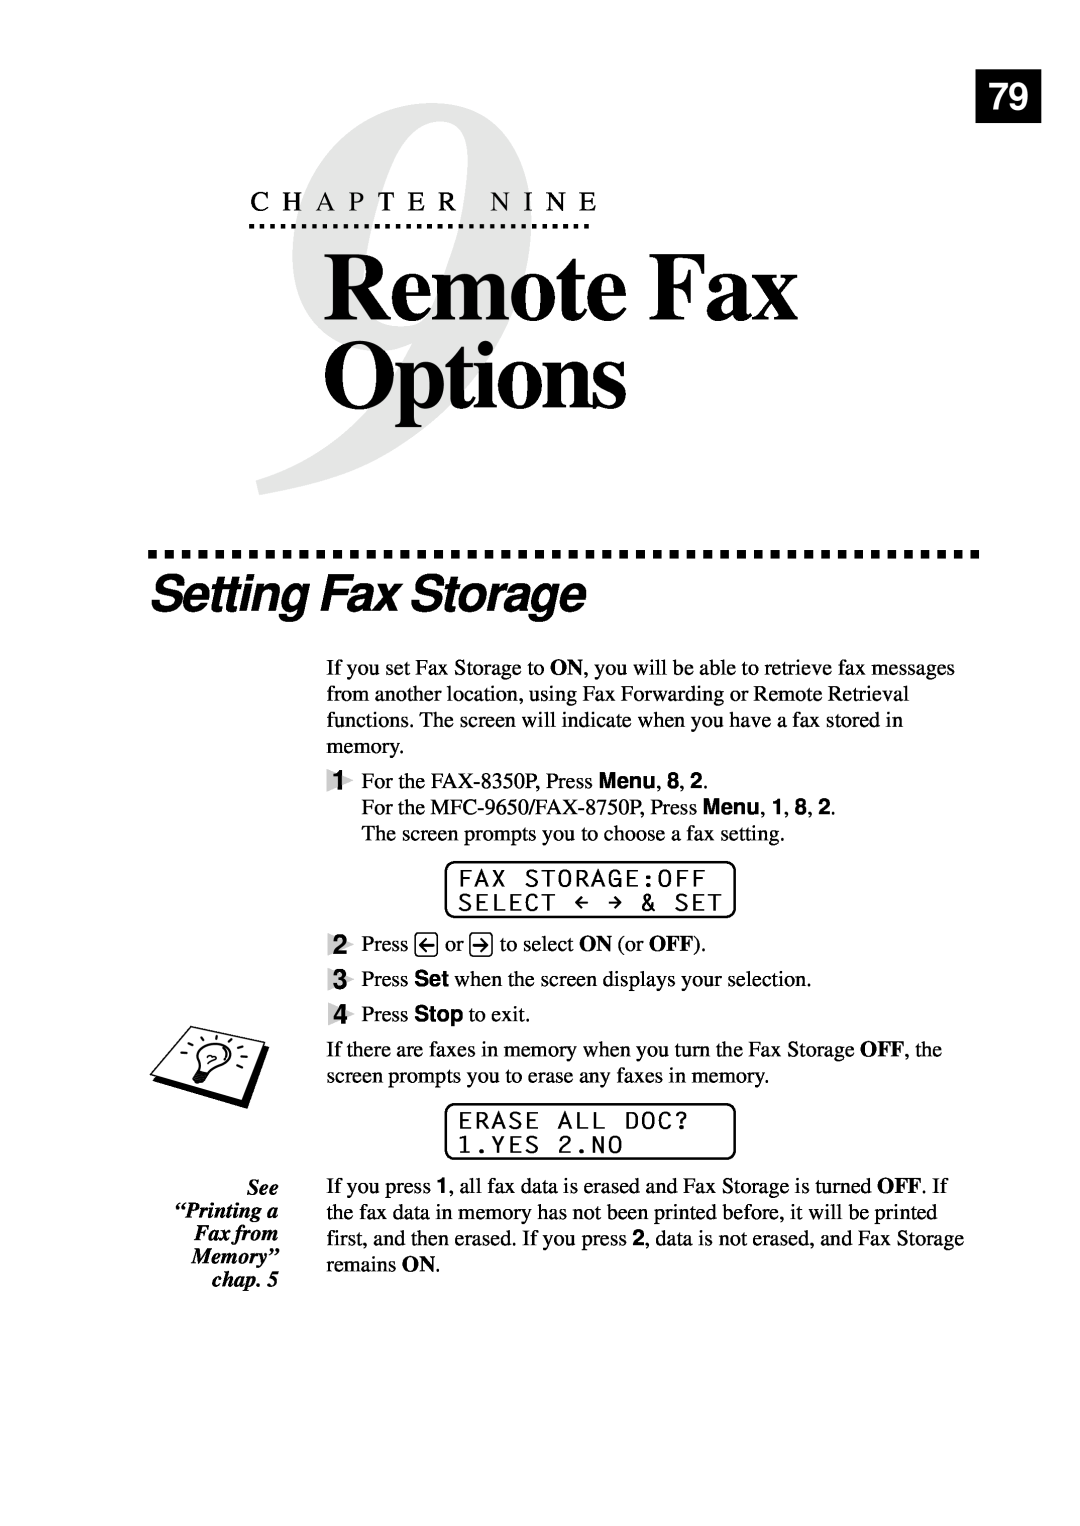 Brother MFC-9650, FAX-8350P Remote Fax, Options, Setting Fax Storage, C H A P T E R N I N E, Fax Storageoff Select & Set 